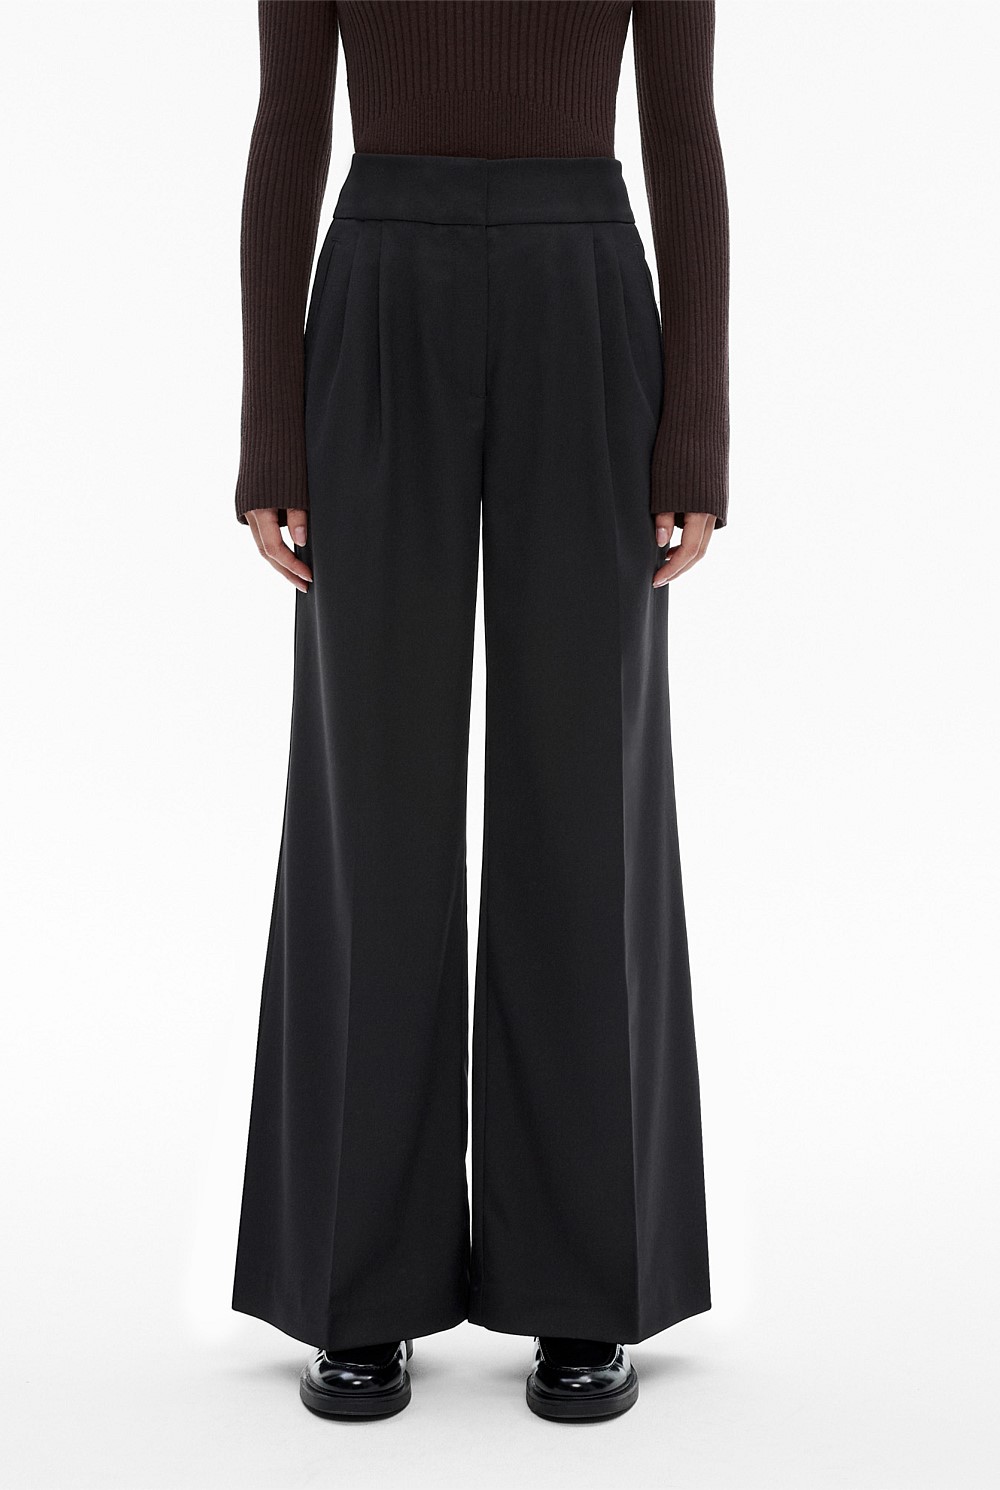 Shop Women's High Waisted & High Rise Pants Online - Witchery